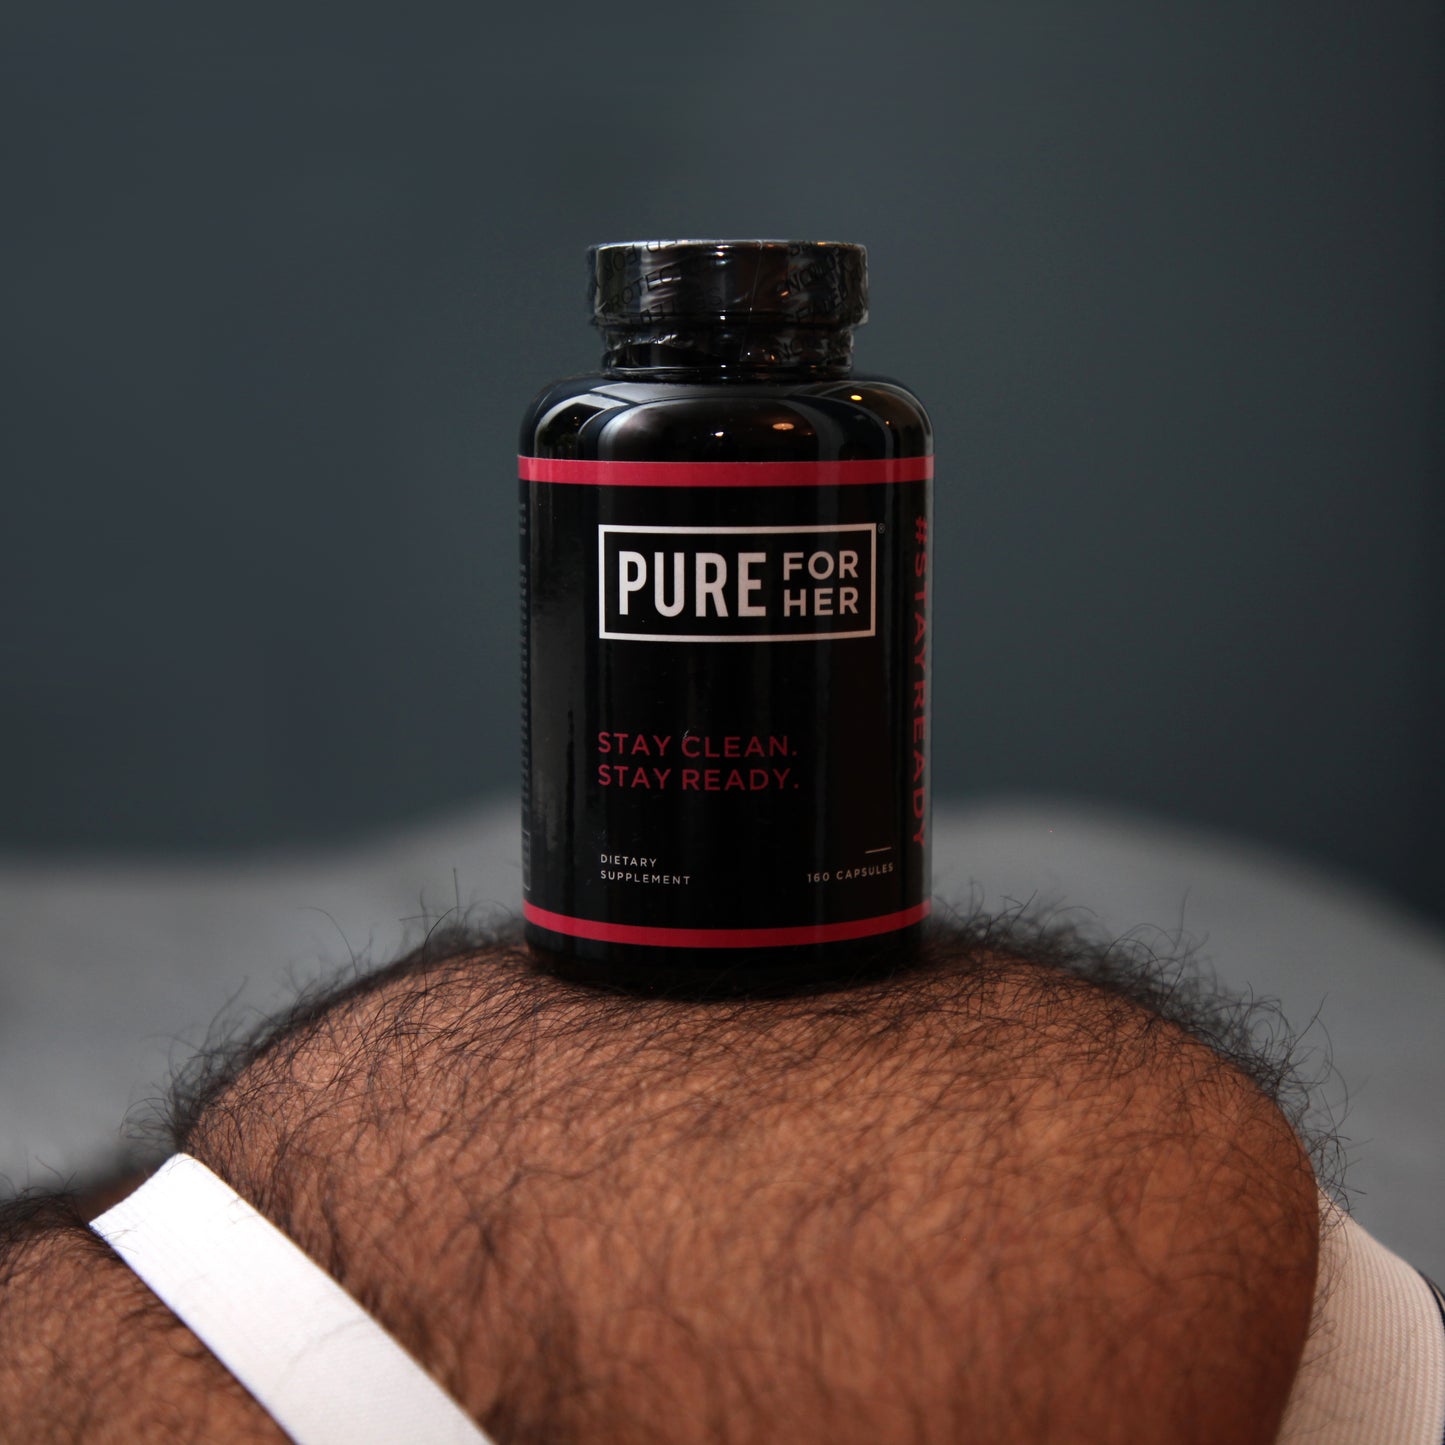 Pure For Her - 160 Capsules